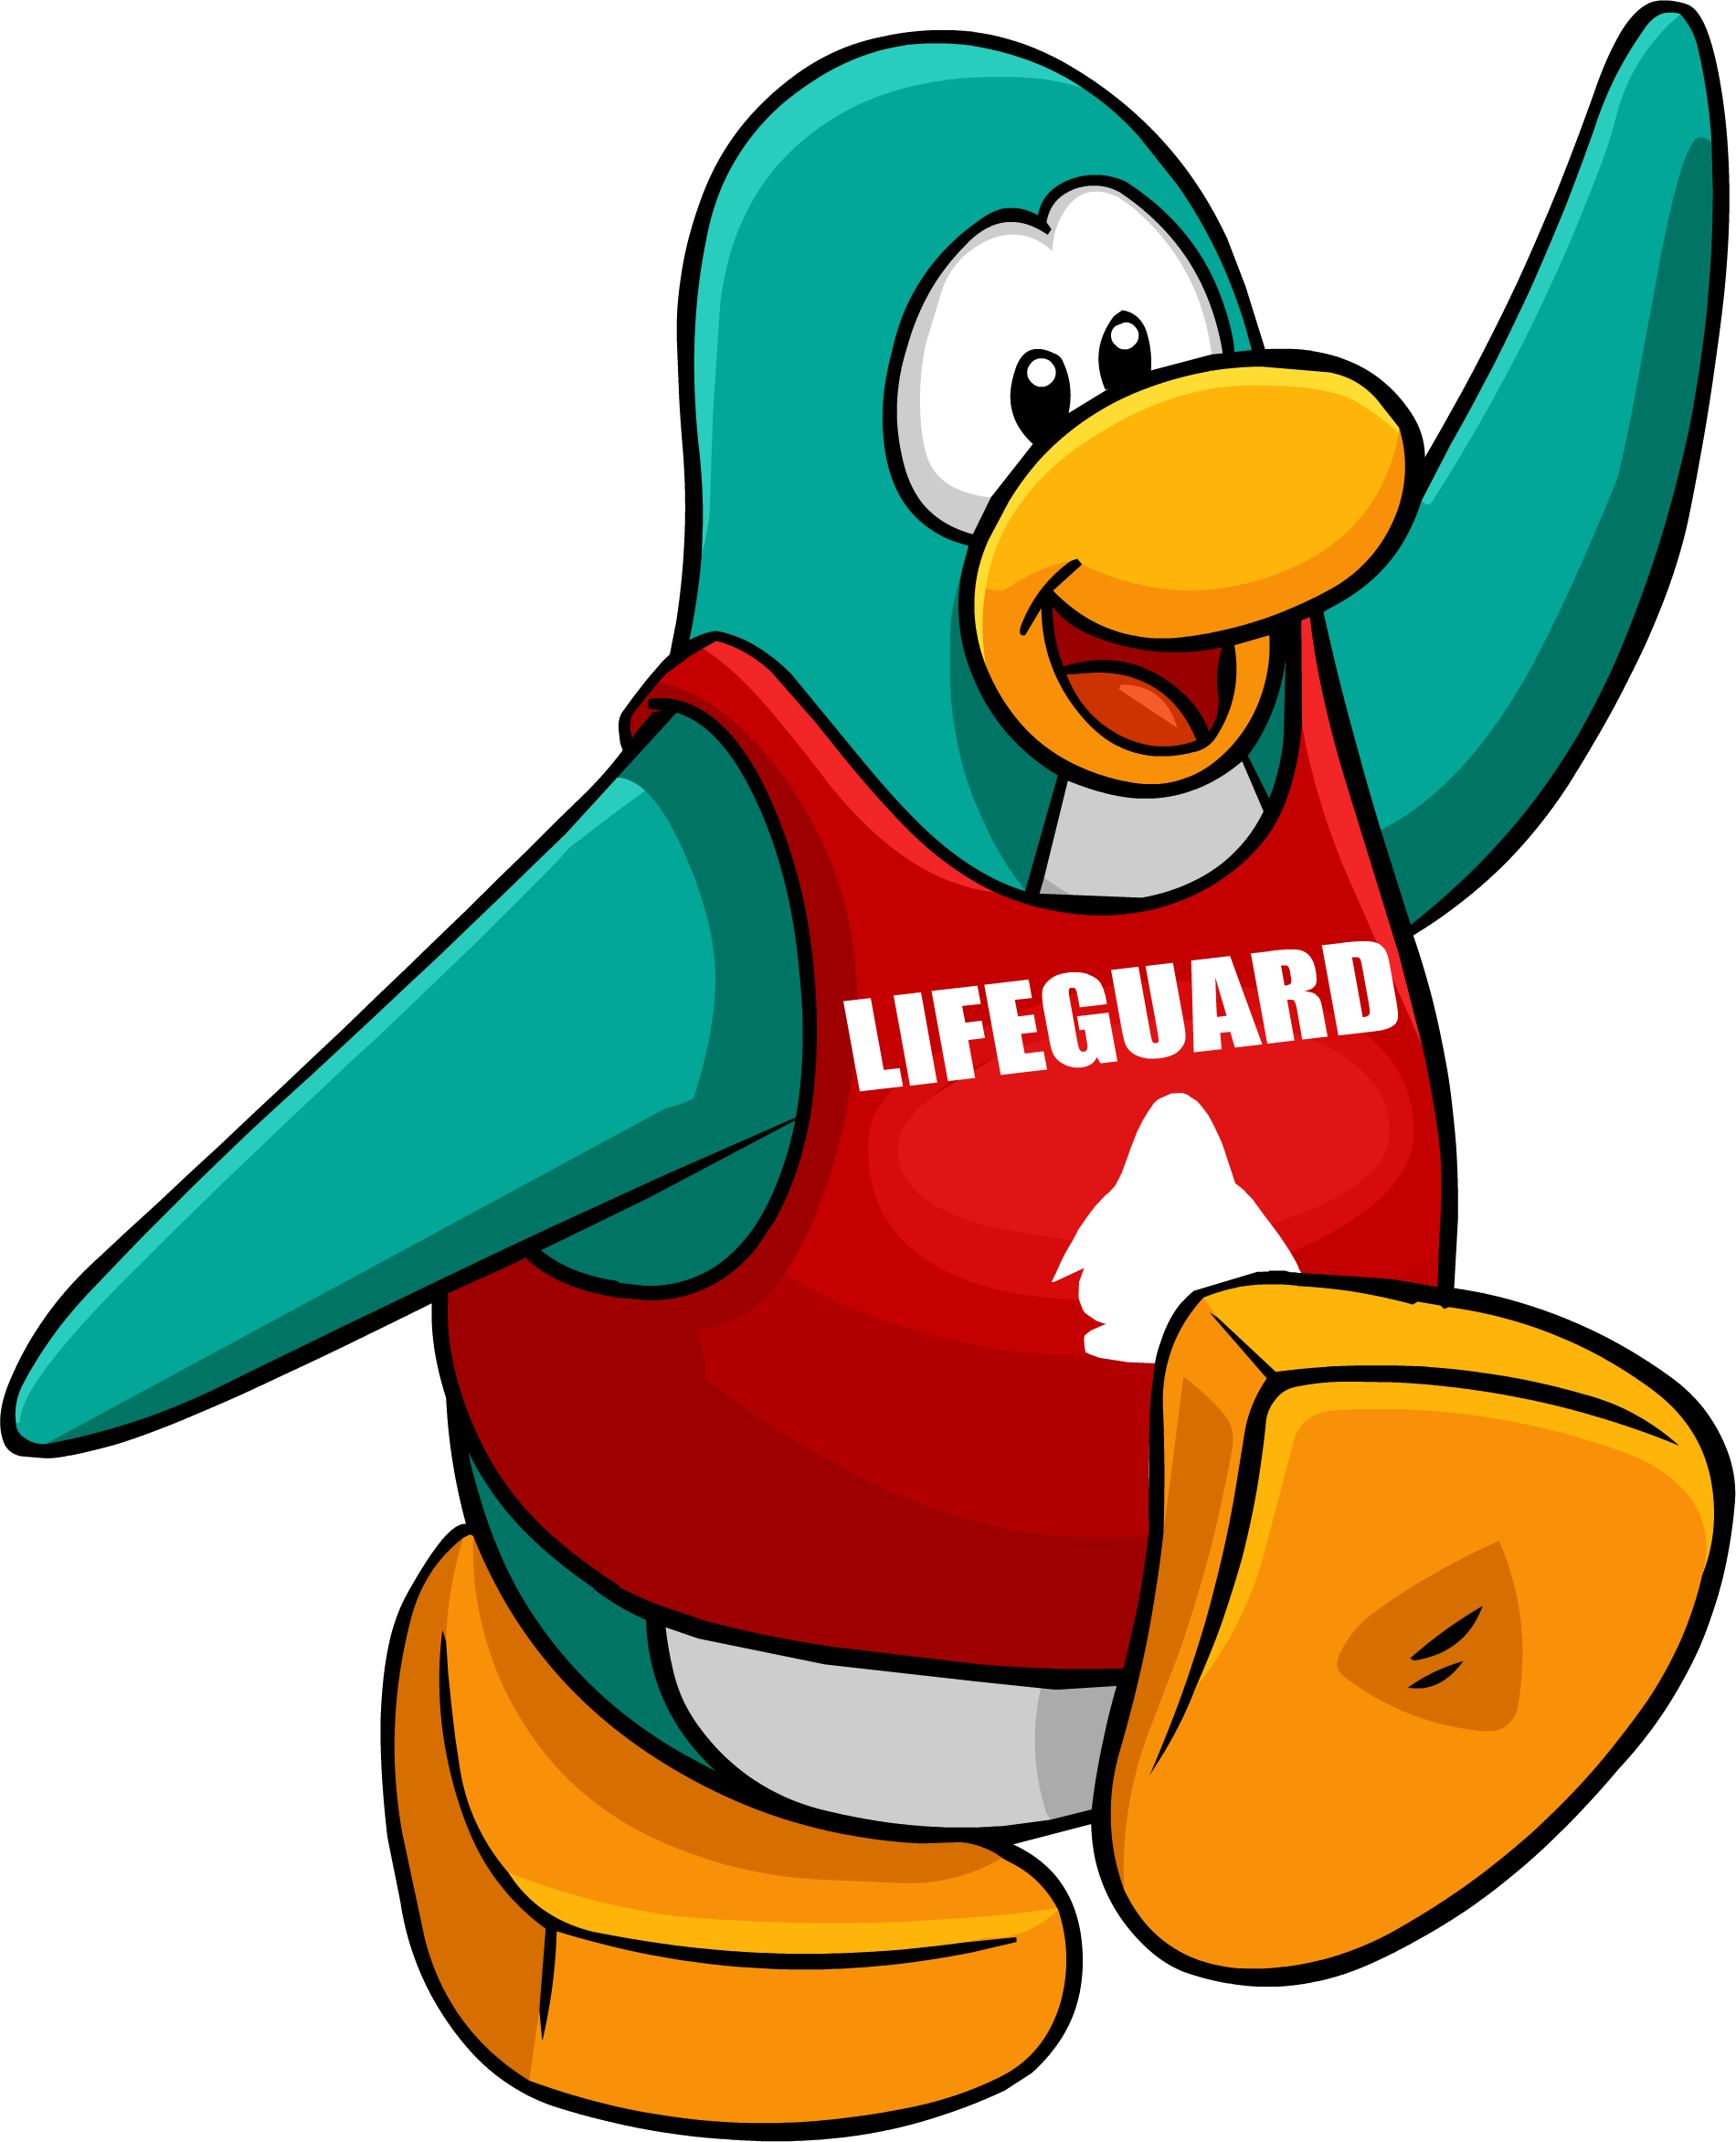 Image penguin style jan. Lifeguard clipart needed